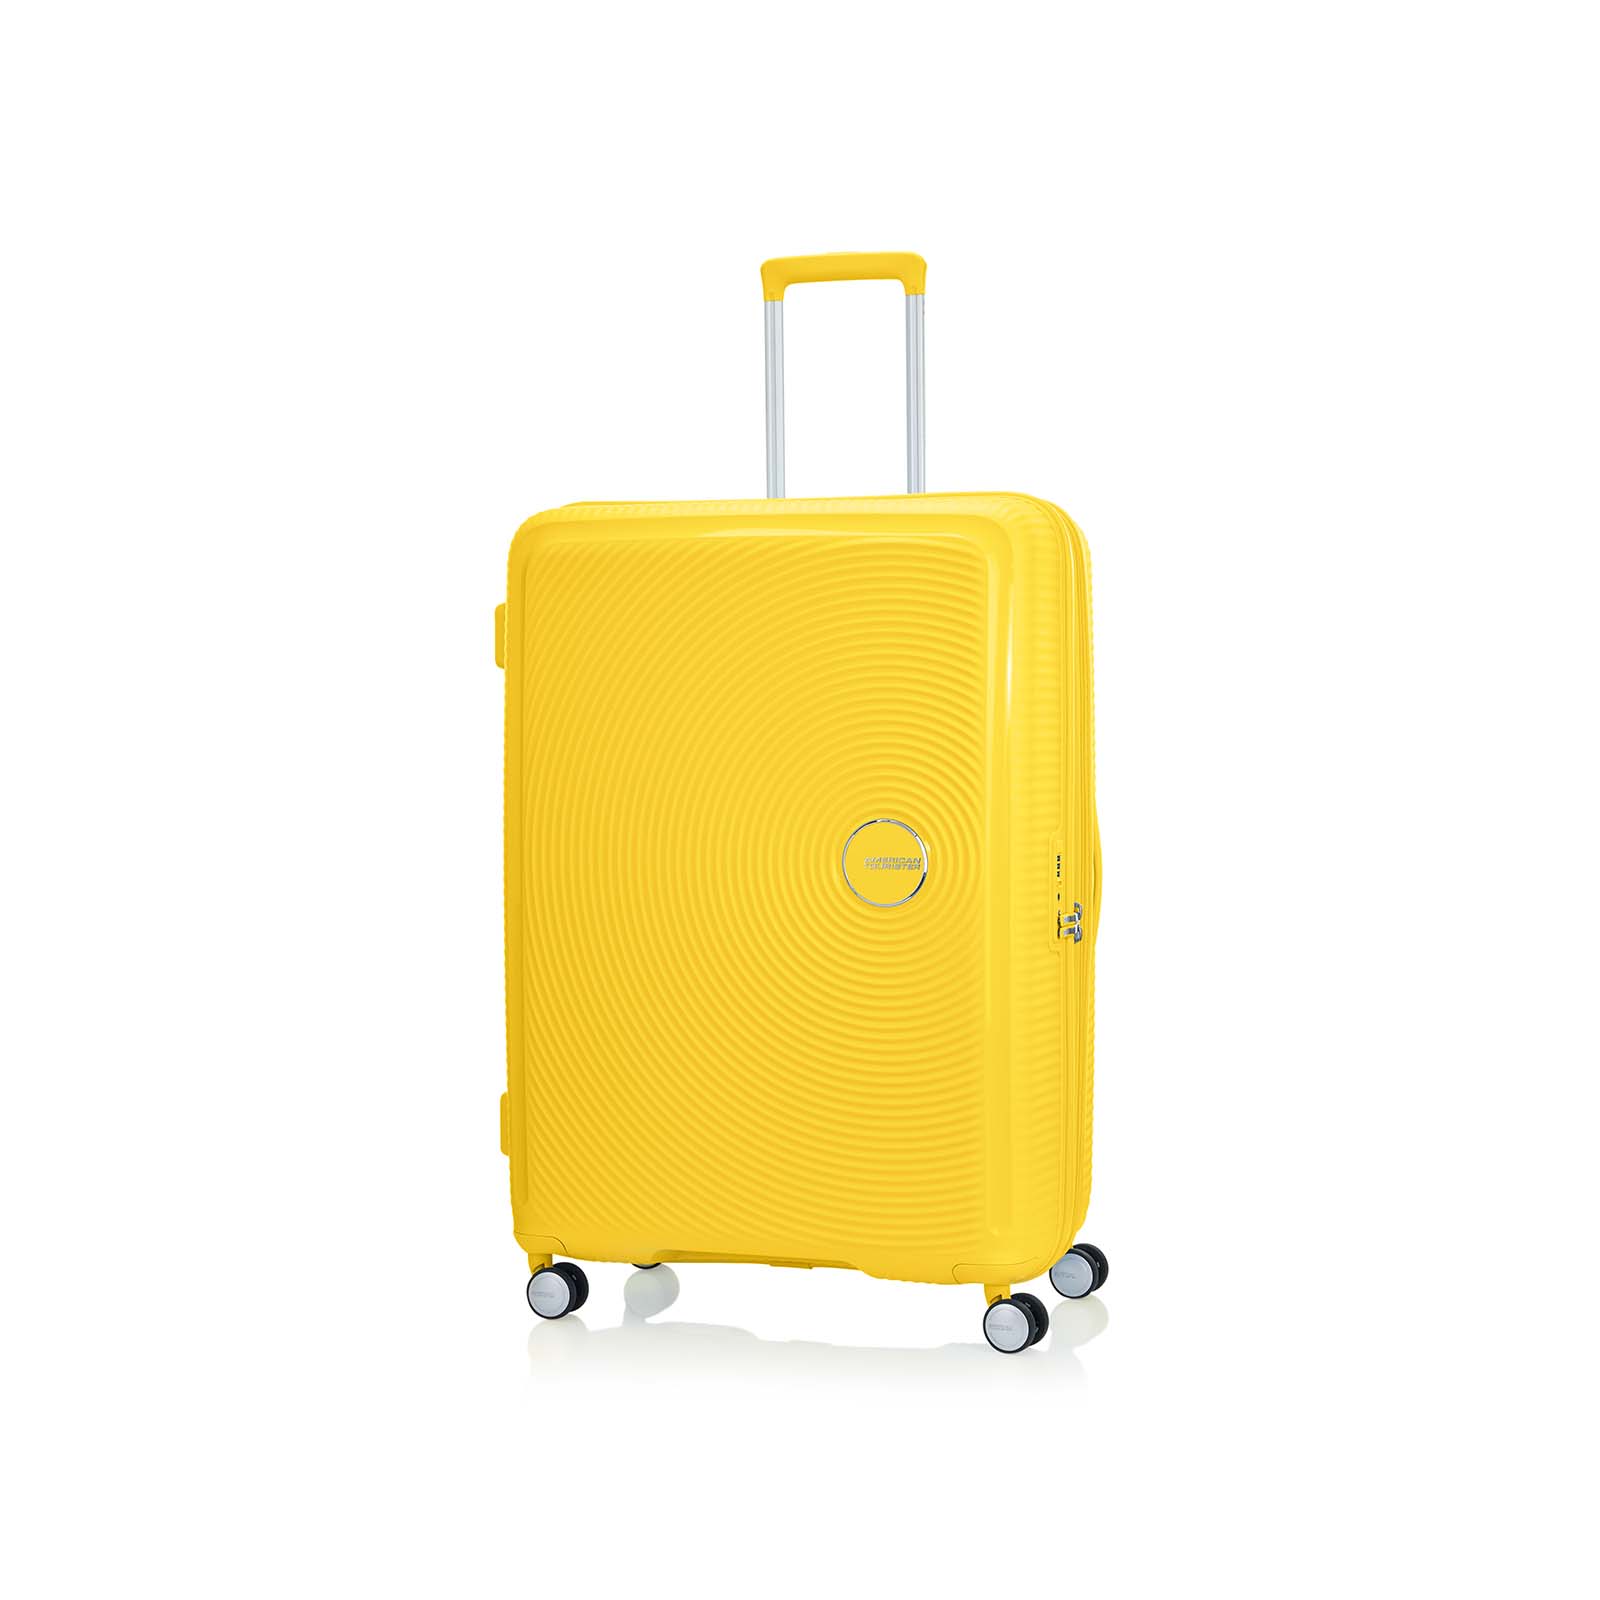 American-Tourister-Curio-2-80cm-Suitcase-Golden-Yellow-Angle